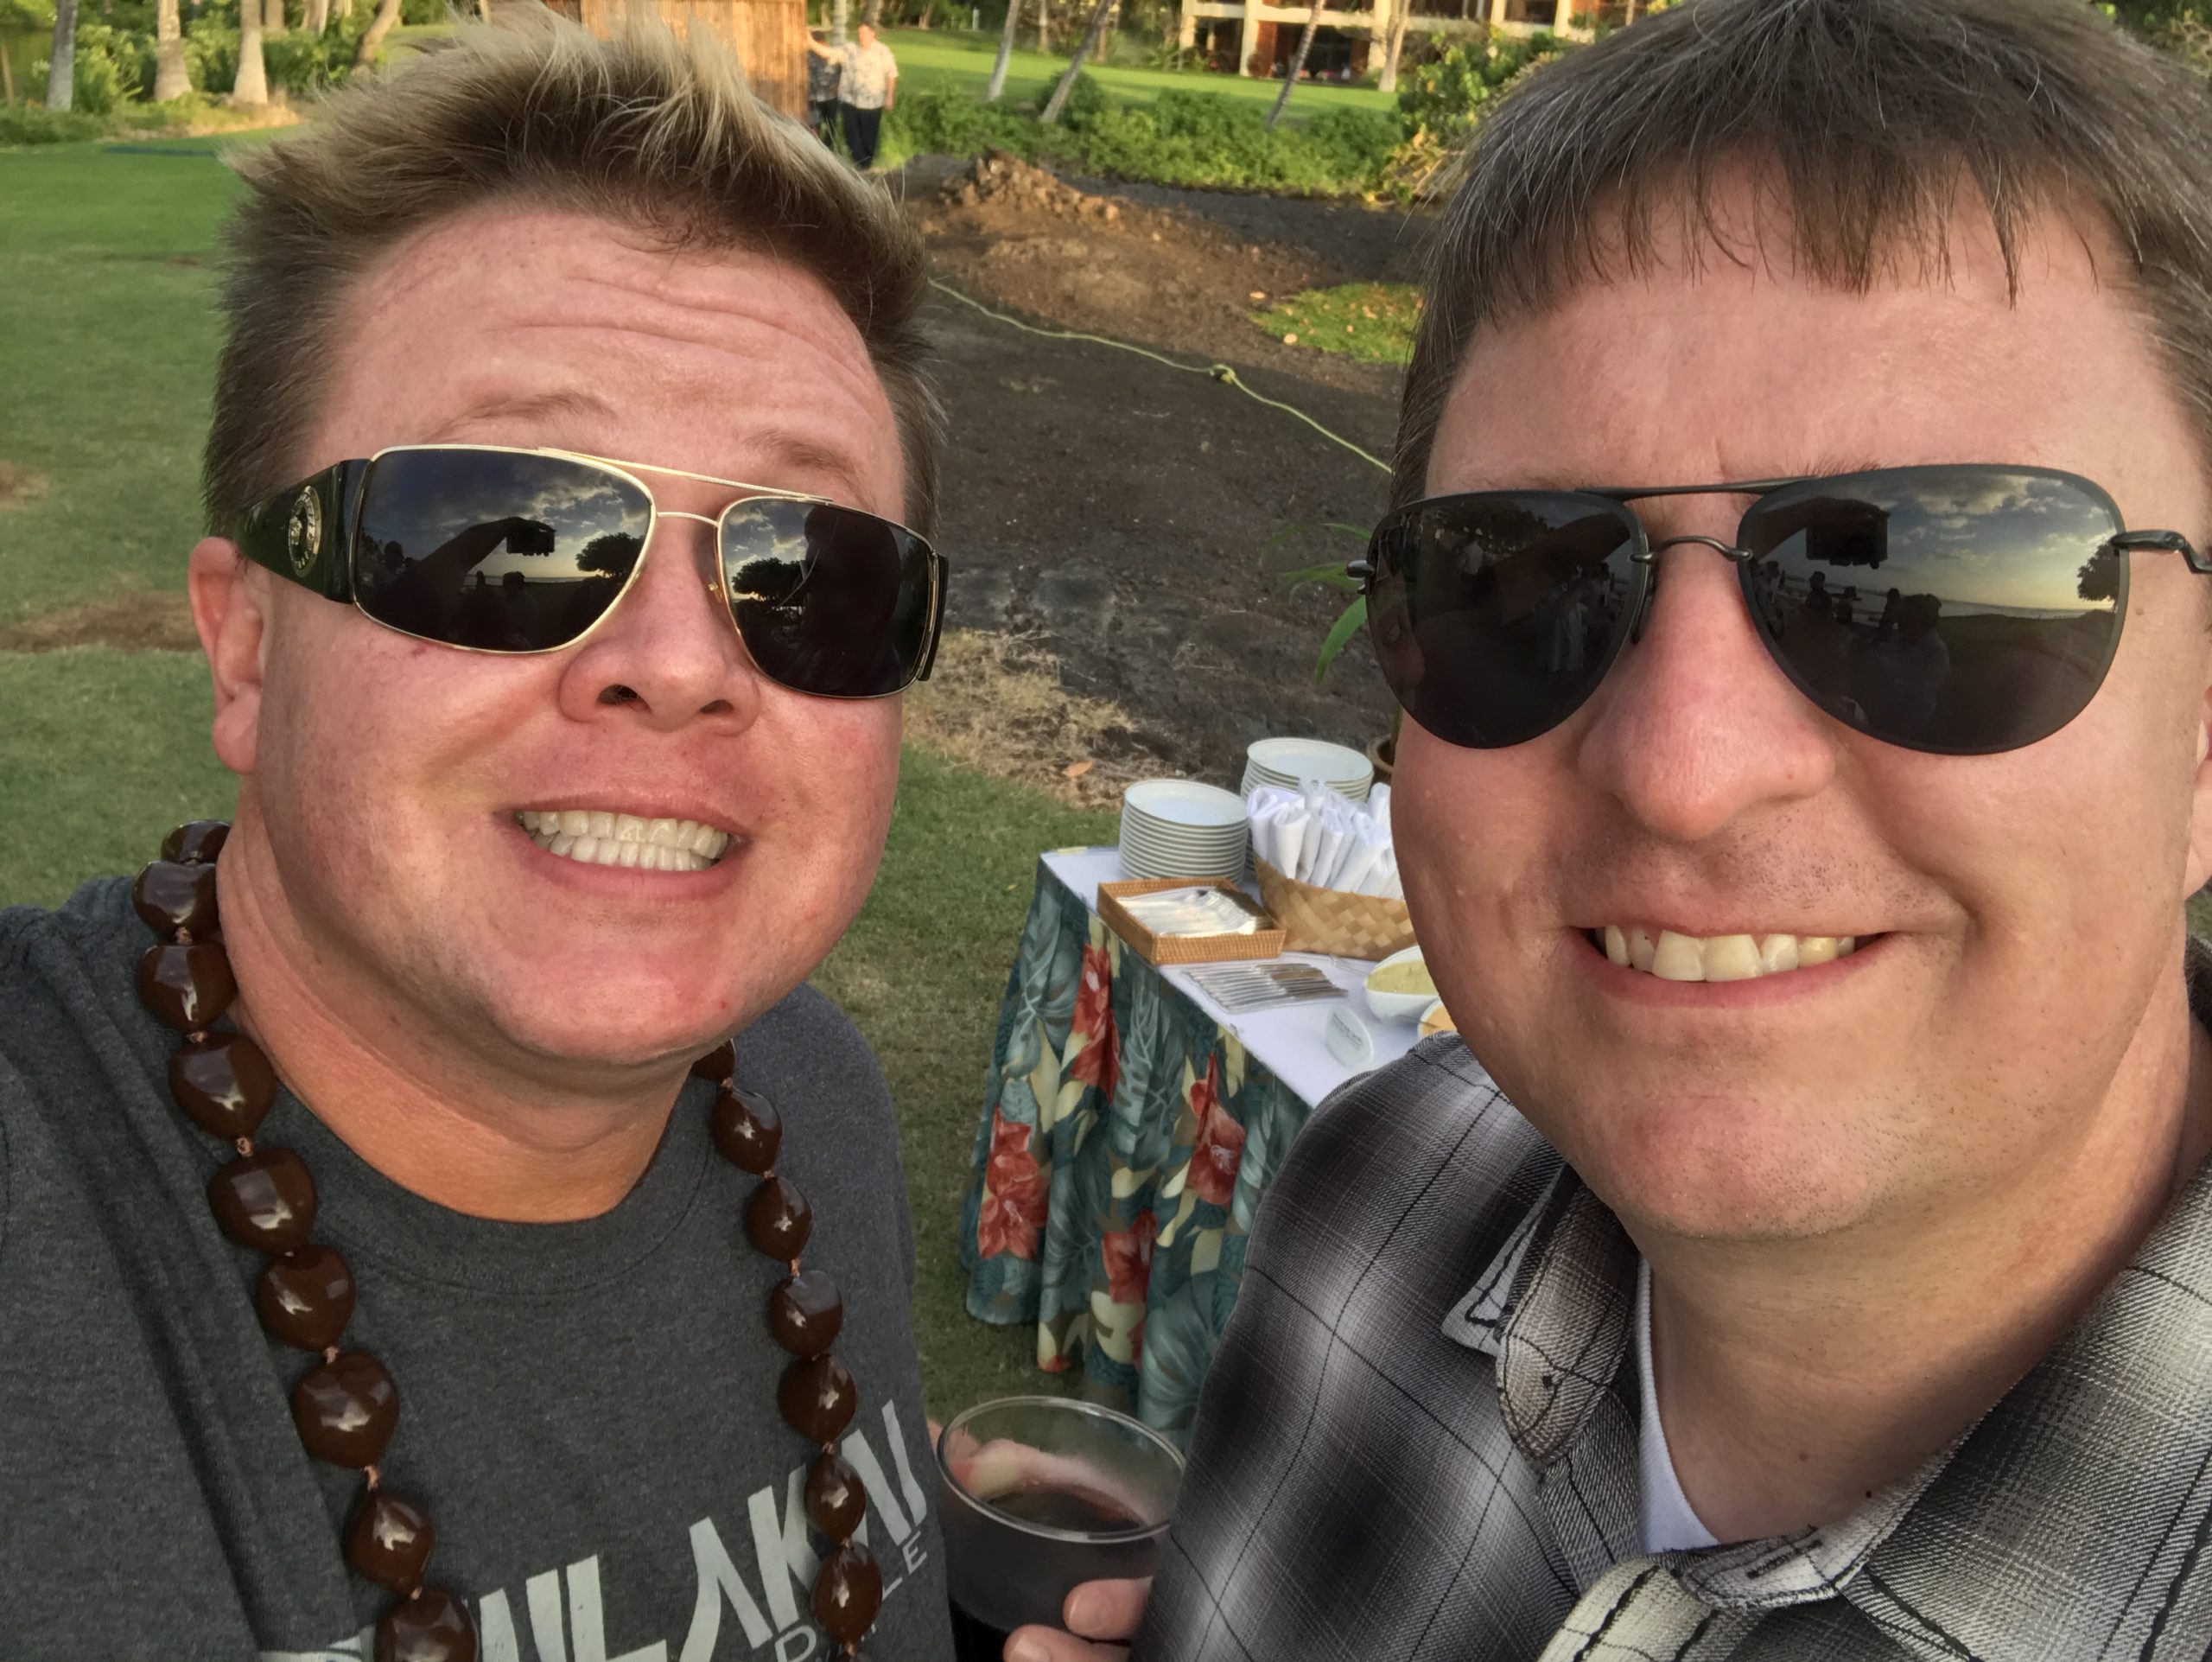 Bill and Joshua at company event in Hawaii